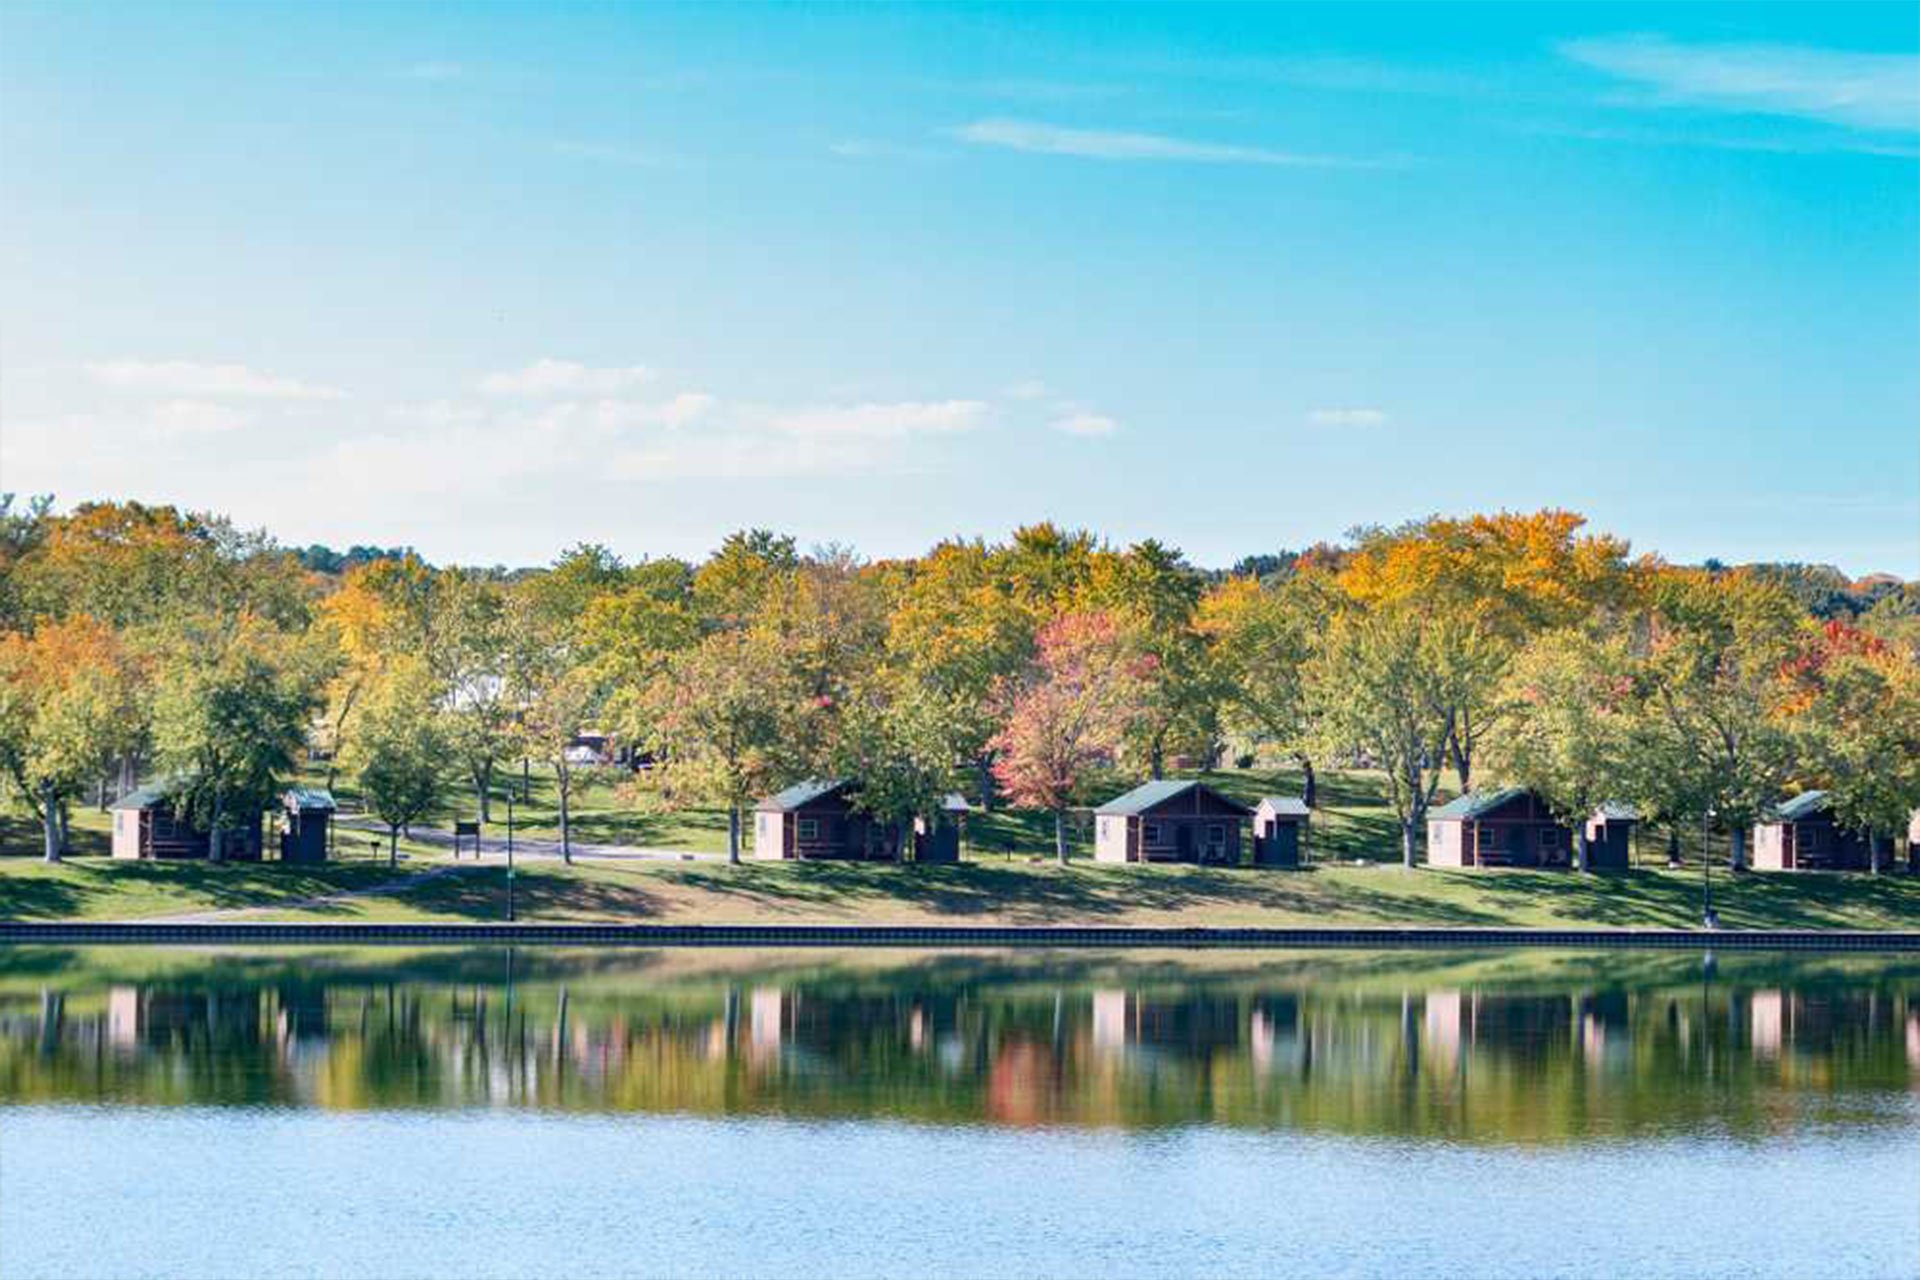 Top Tent Campgrounds in Lakelands Trail State Park, Michigan